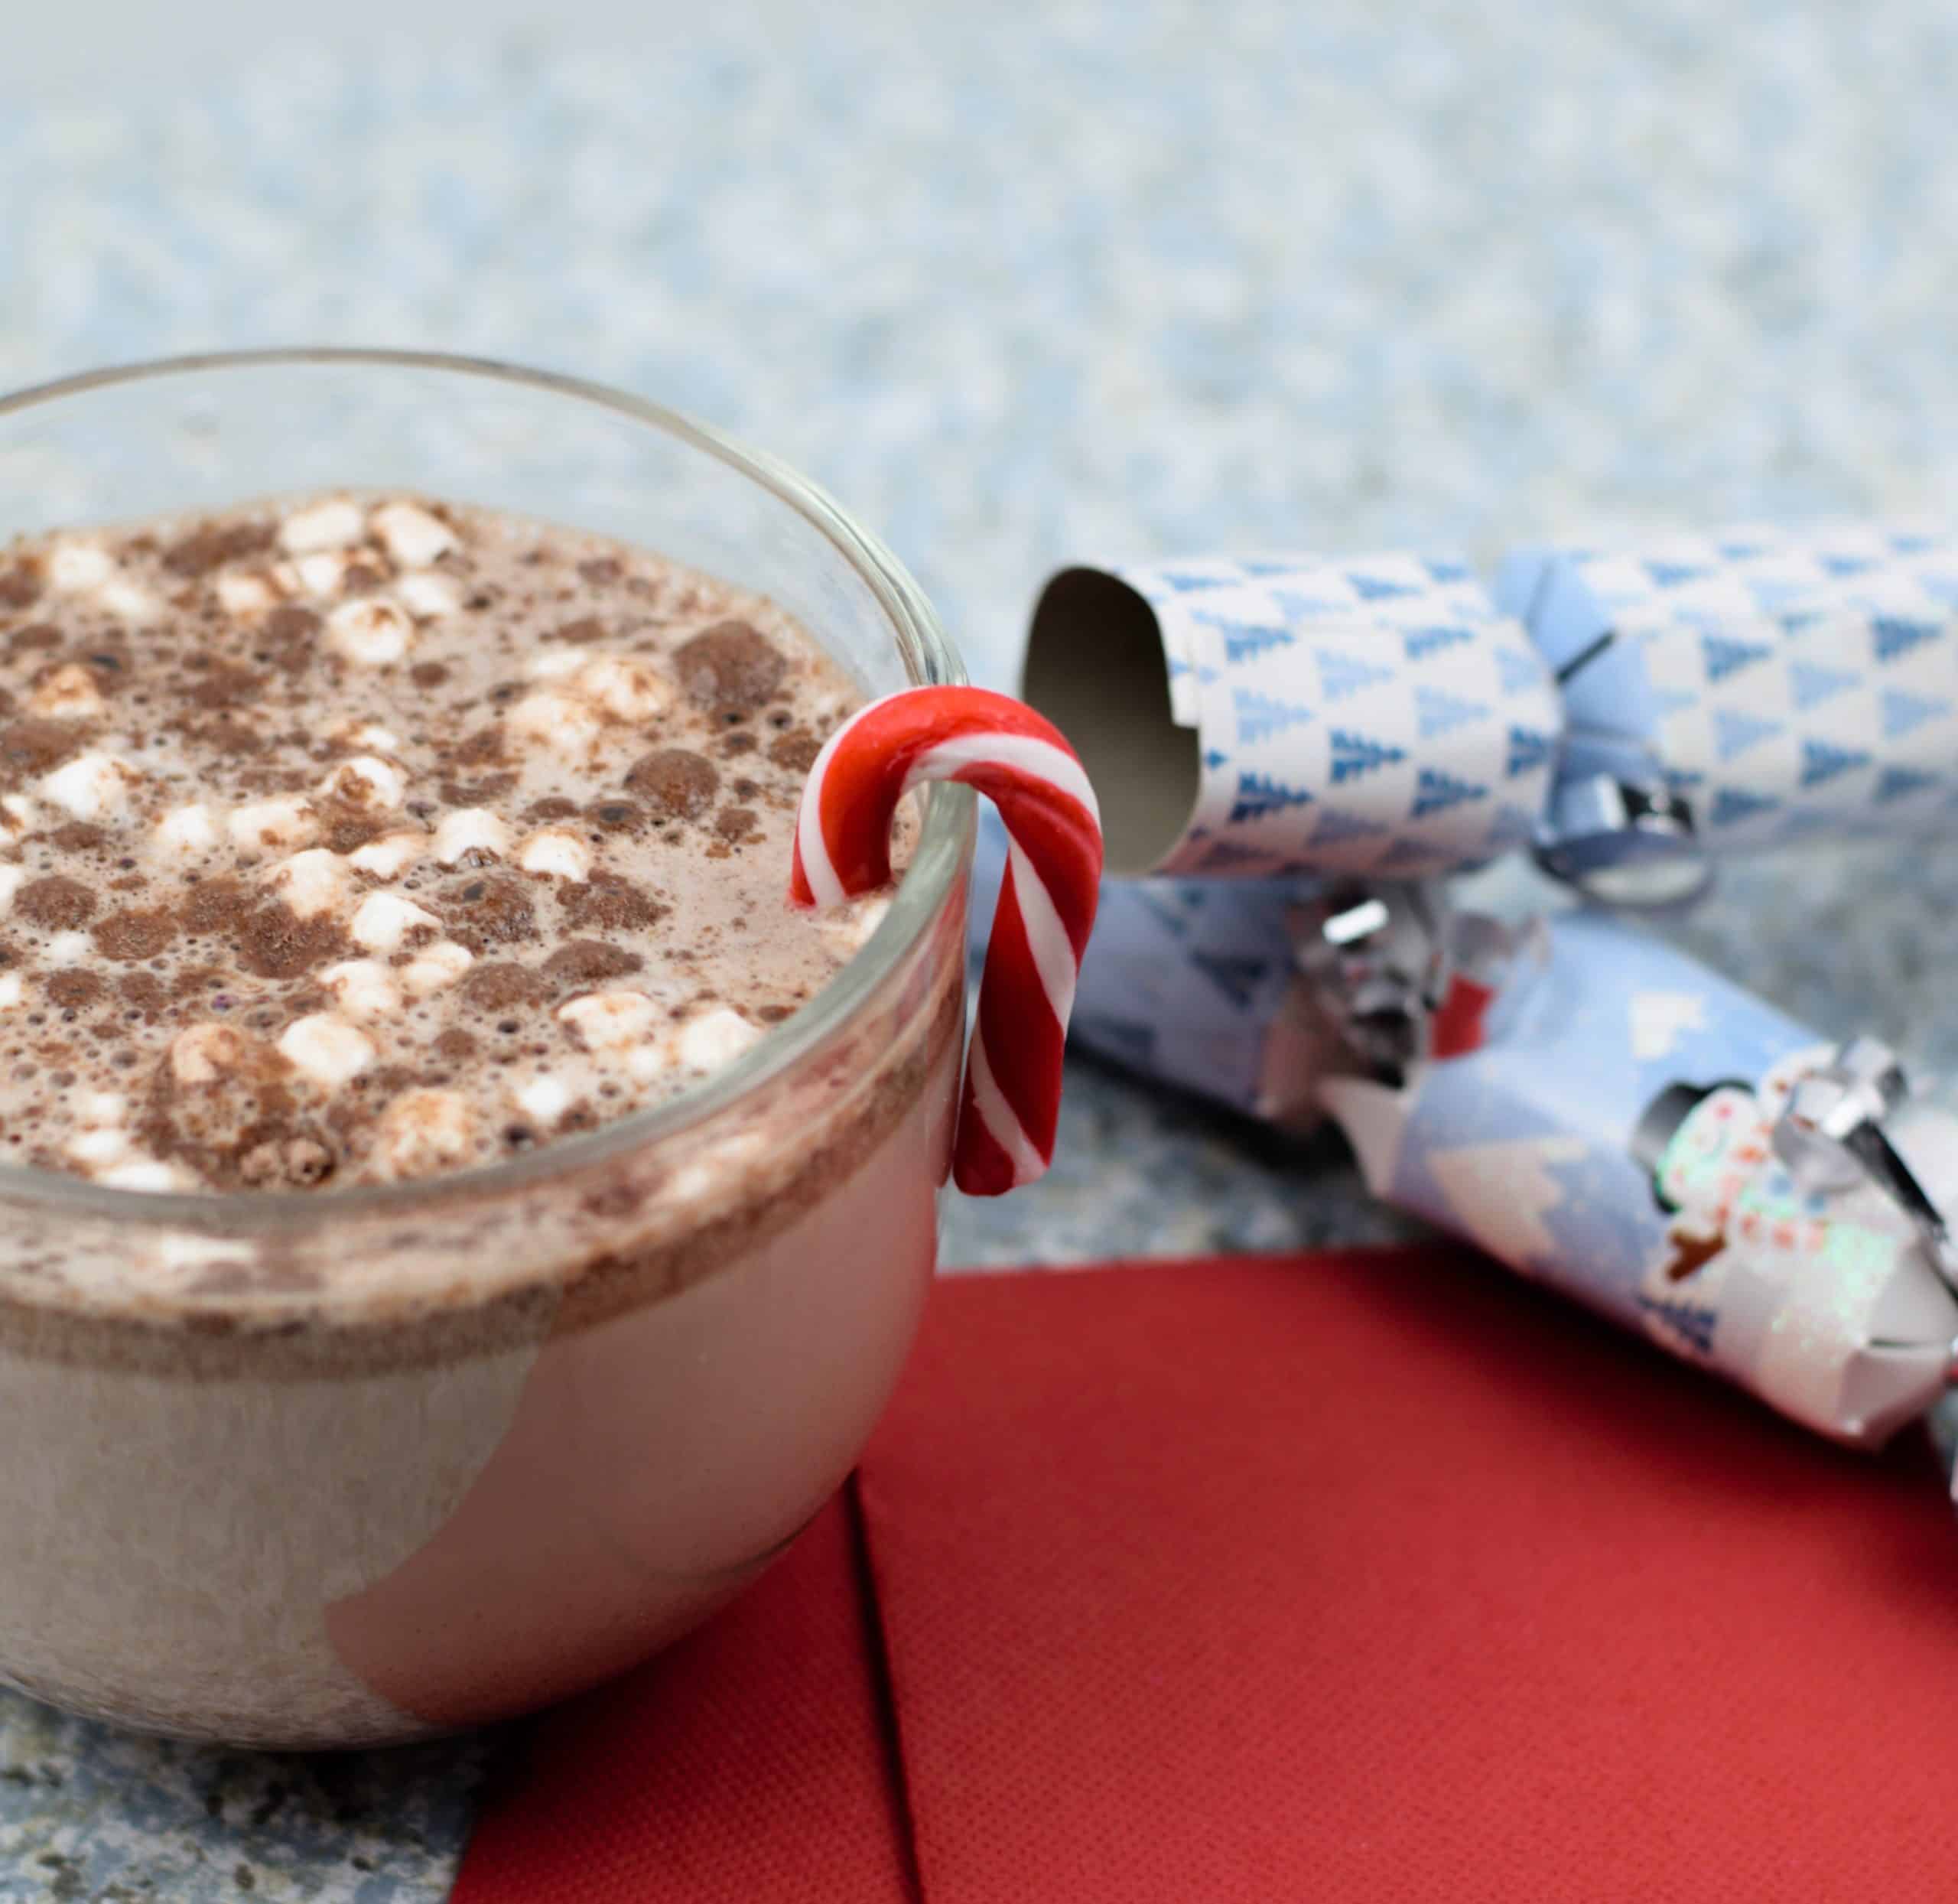 Make Your Own Kinder Egg Hot Chocolate Bombs